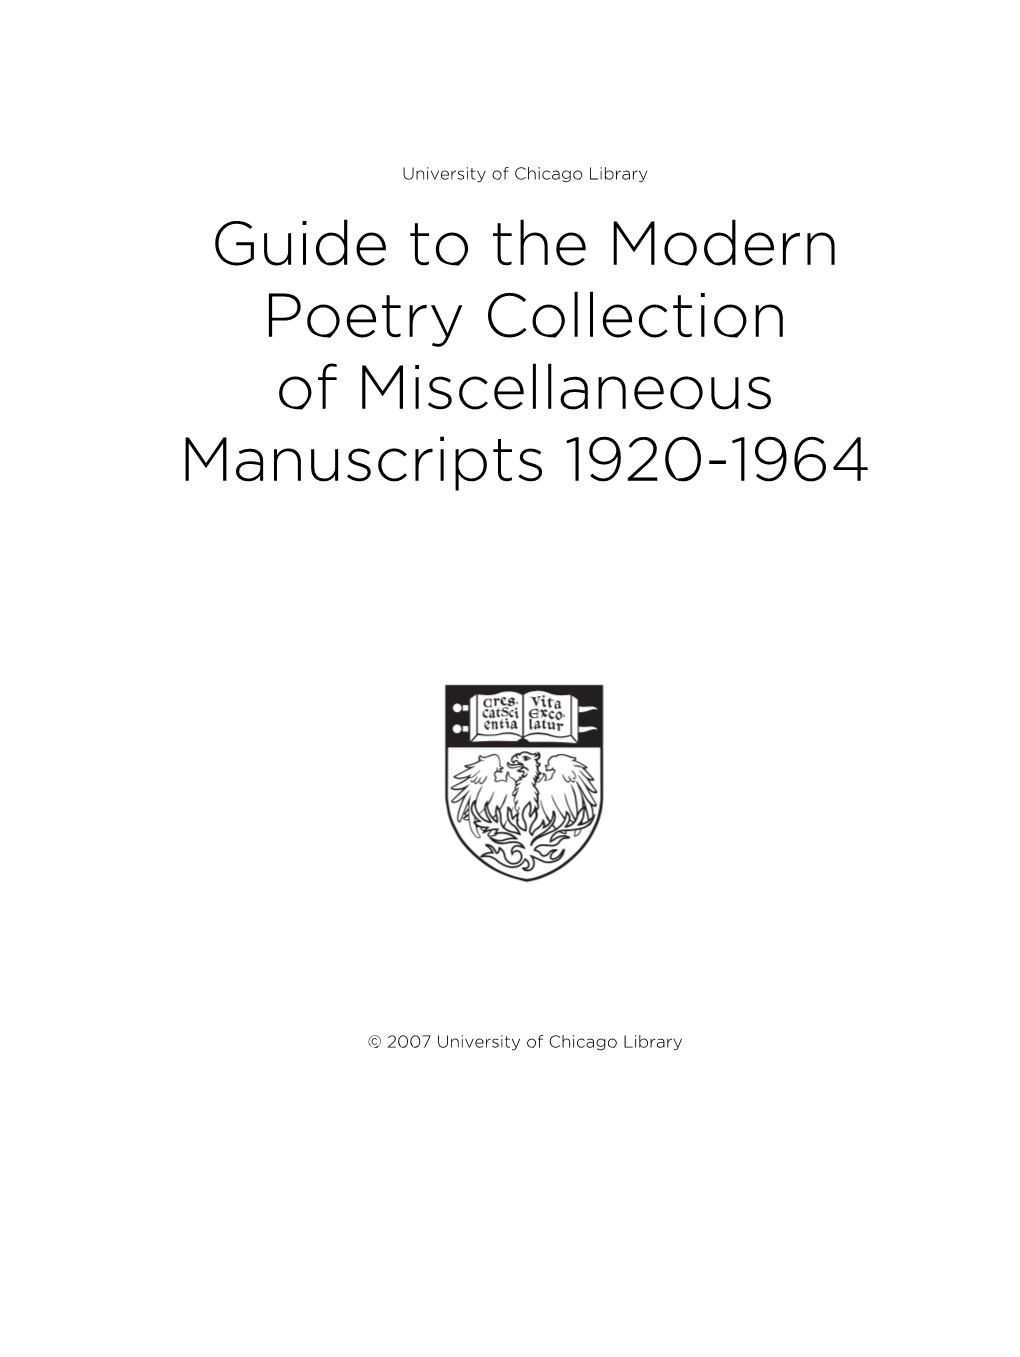 Guide to the Modern Poetry Collection of Miscellaneous Manuscripts 1920-1964